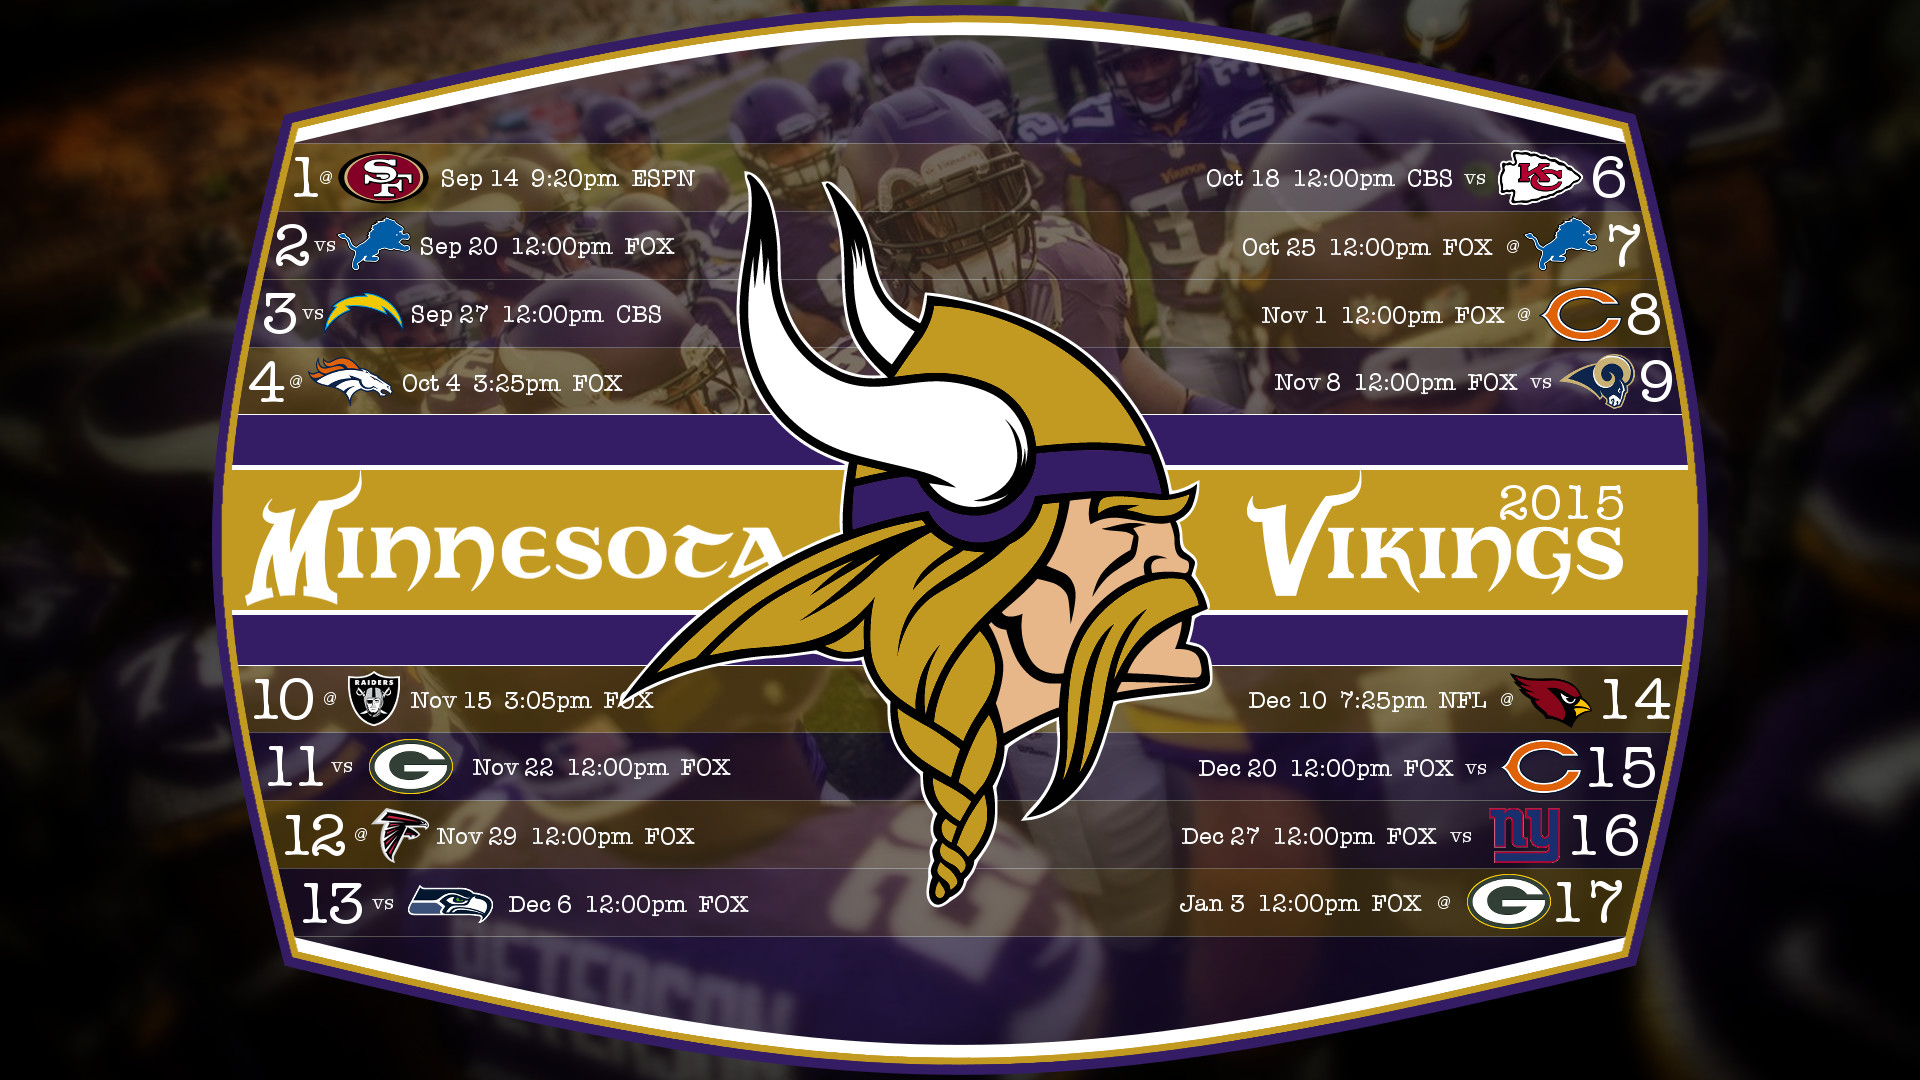 1920x1080 Search Results for “minnesota vikings schedule wallpaper” – Adorable  Wallpapers